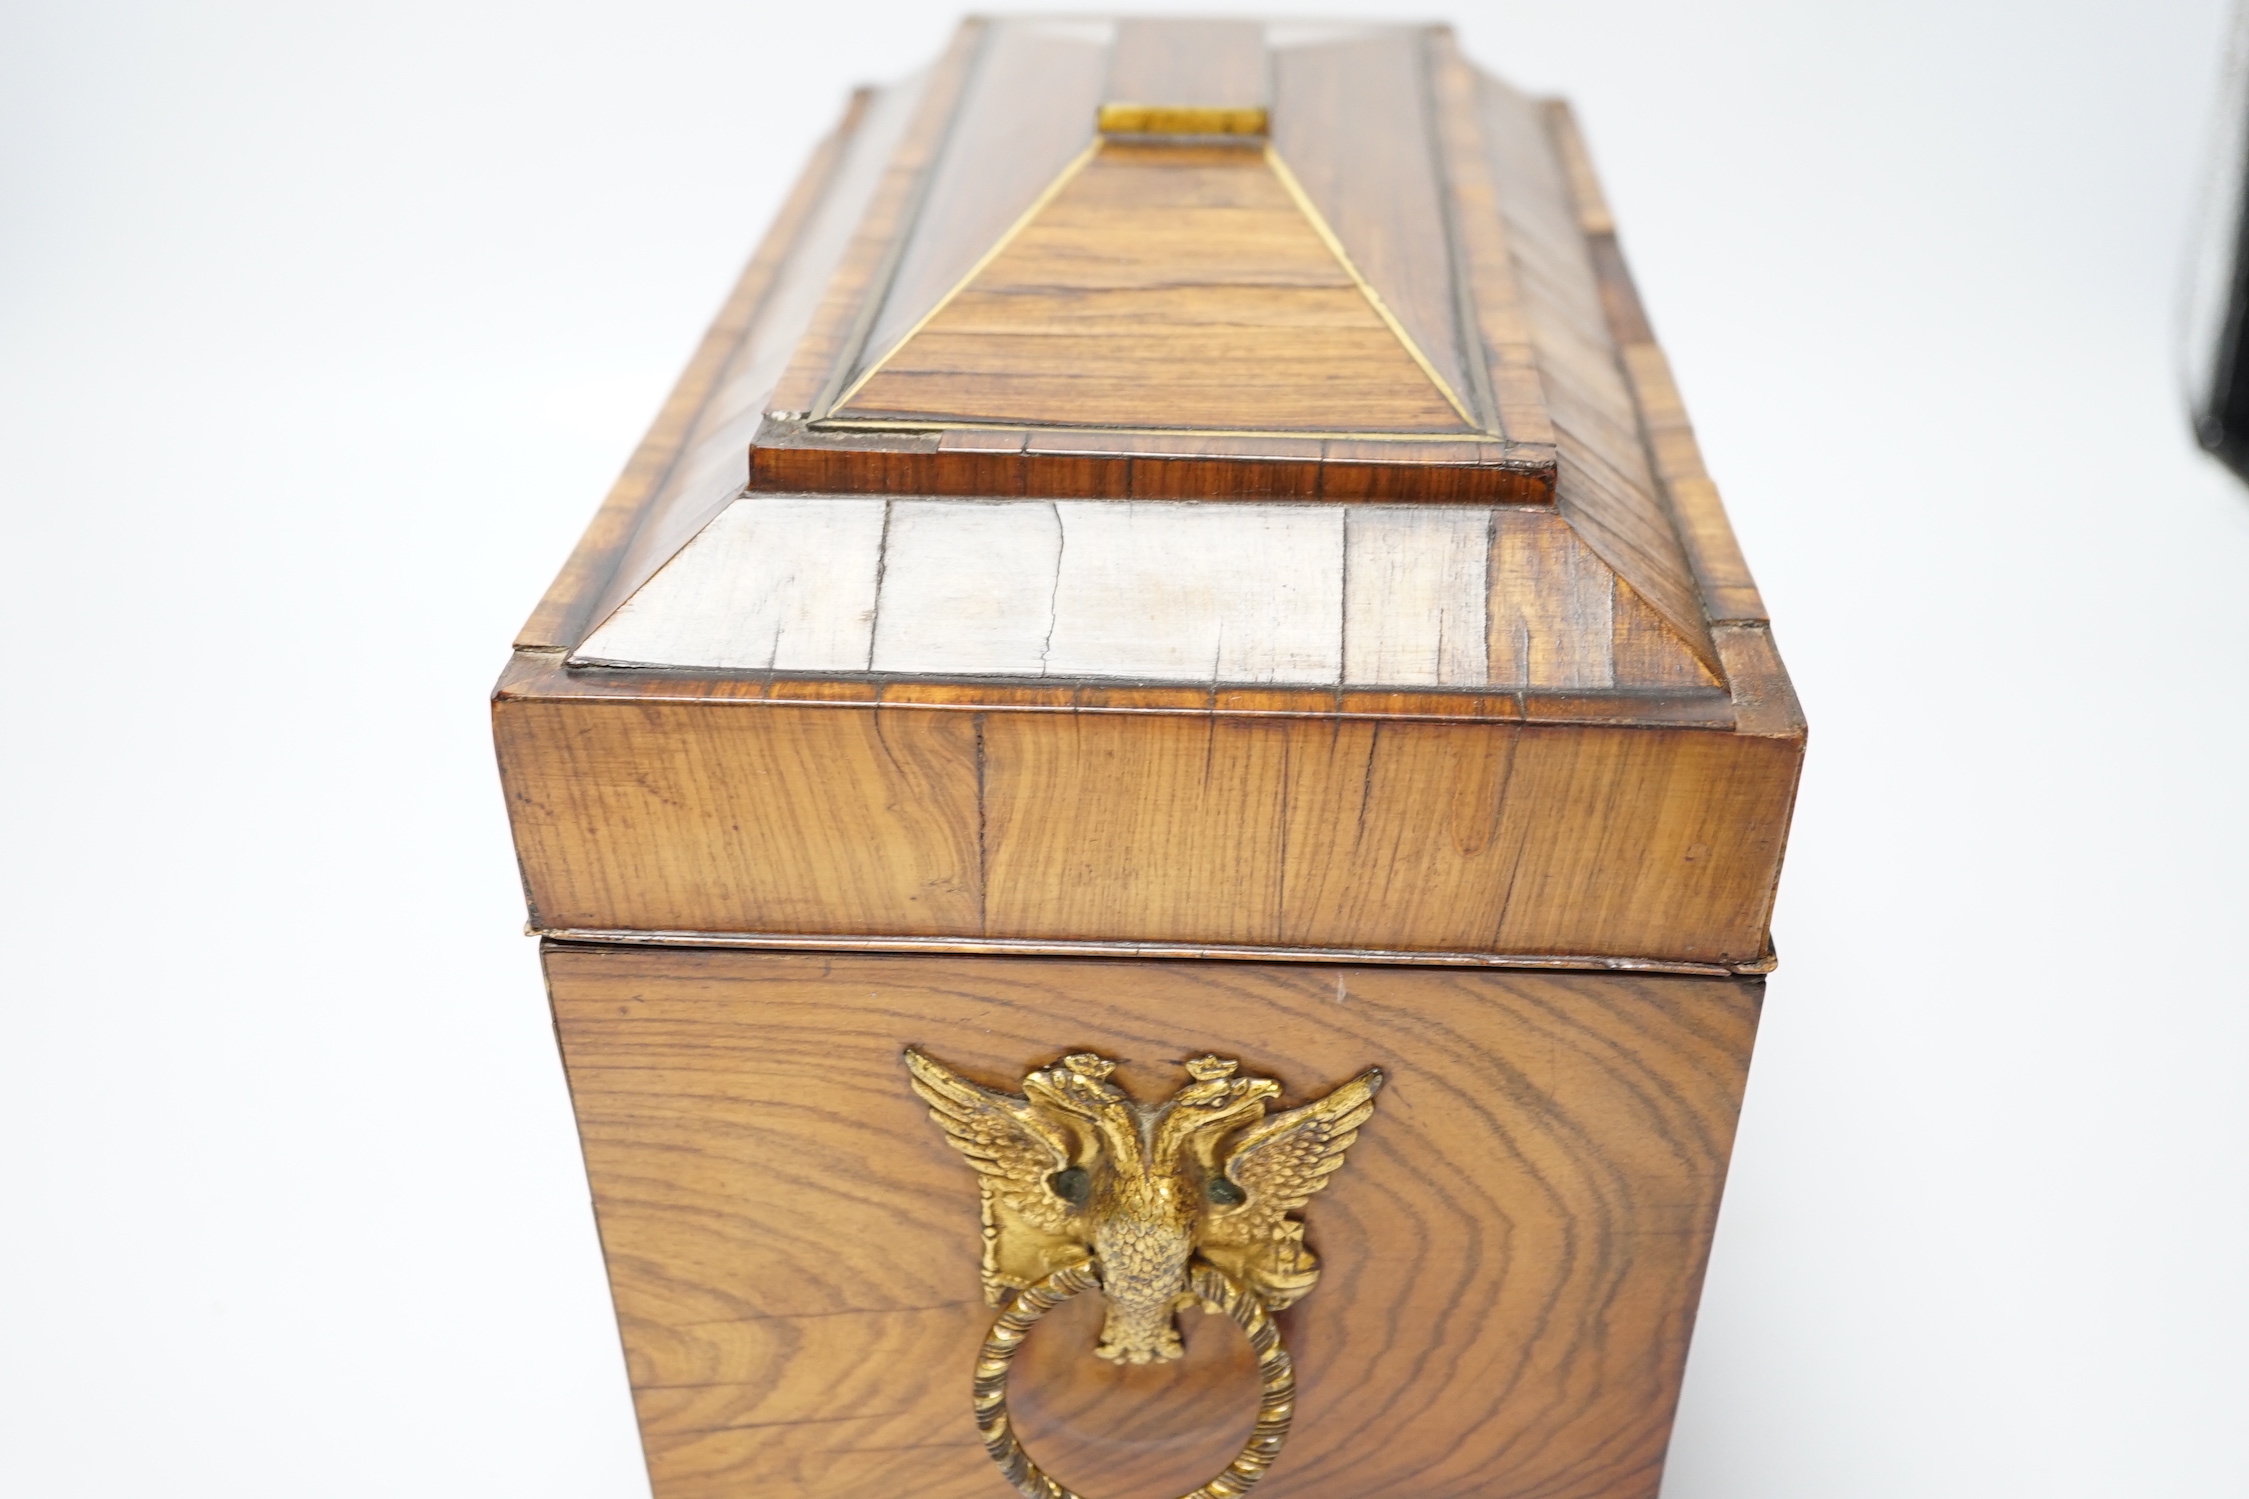 A Regency kingwood and brass strung sarcophagus tea caddy, manufacturers label for Staudenmeyer, 30 Cockspur Street, Charing Cross, London, double headed eagle handles, 21.5cm high, 30.5cm wide, 15cm deep